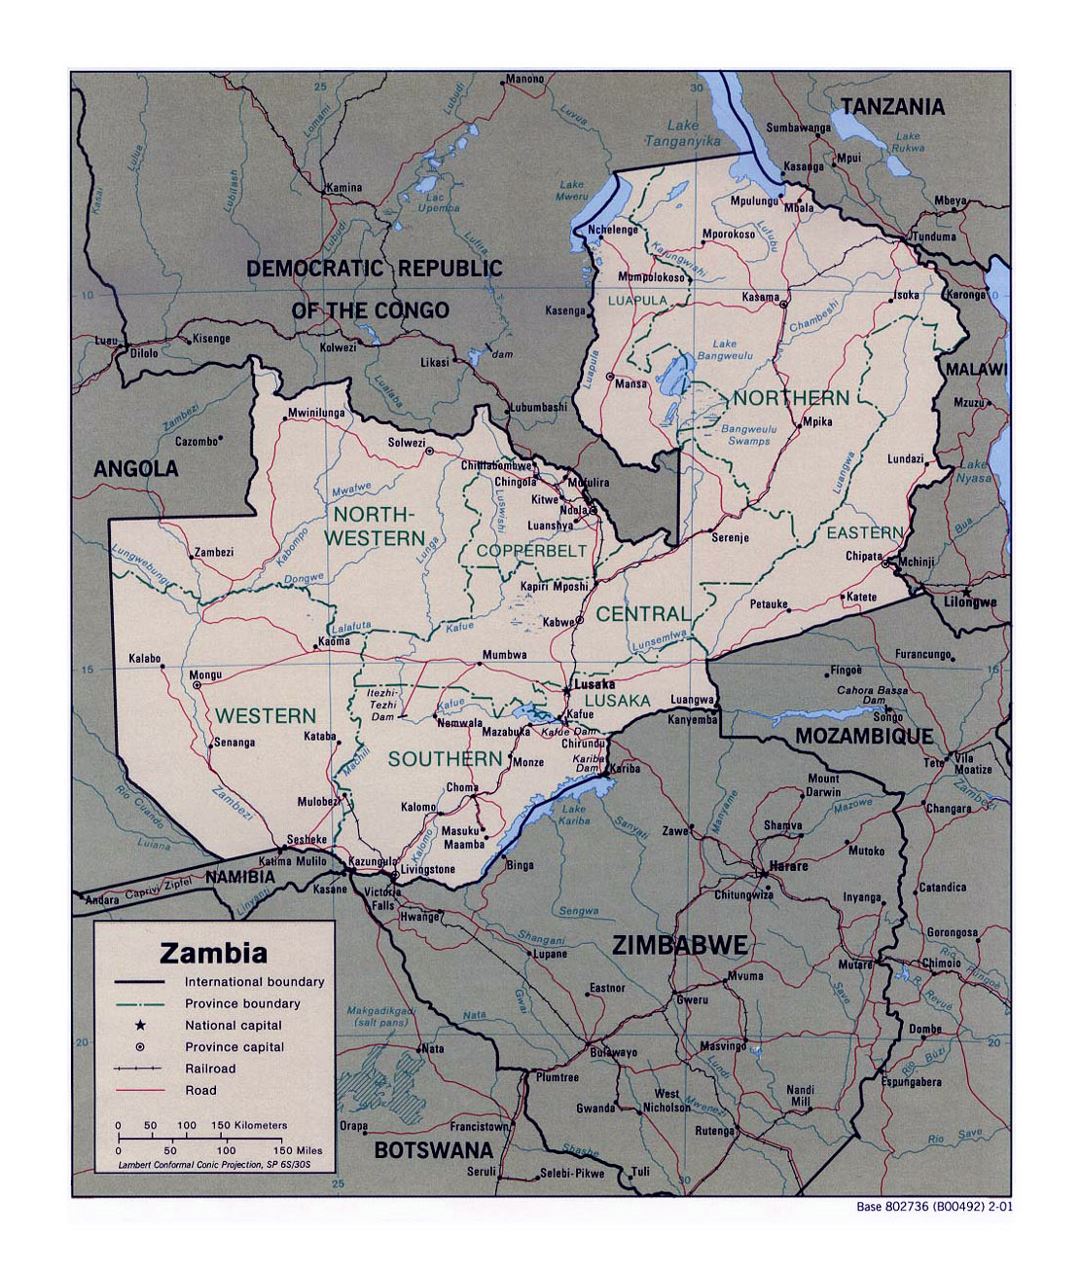 Detailed political and administrative map of Zambia with roads, railroads and major cities - 2001